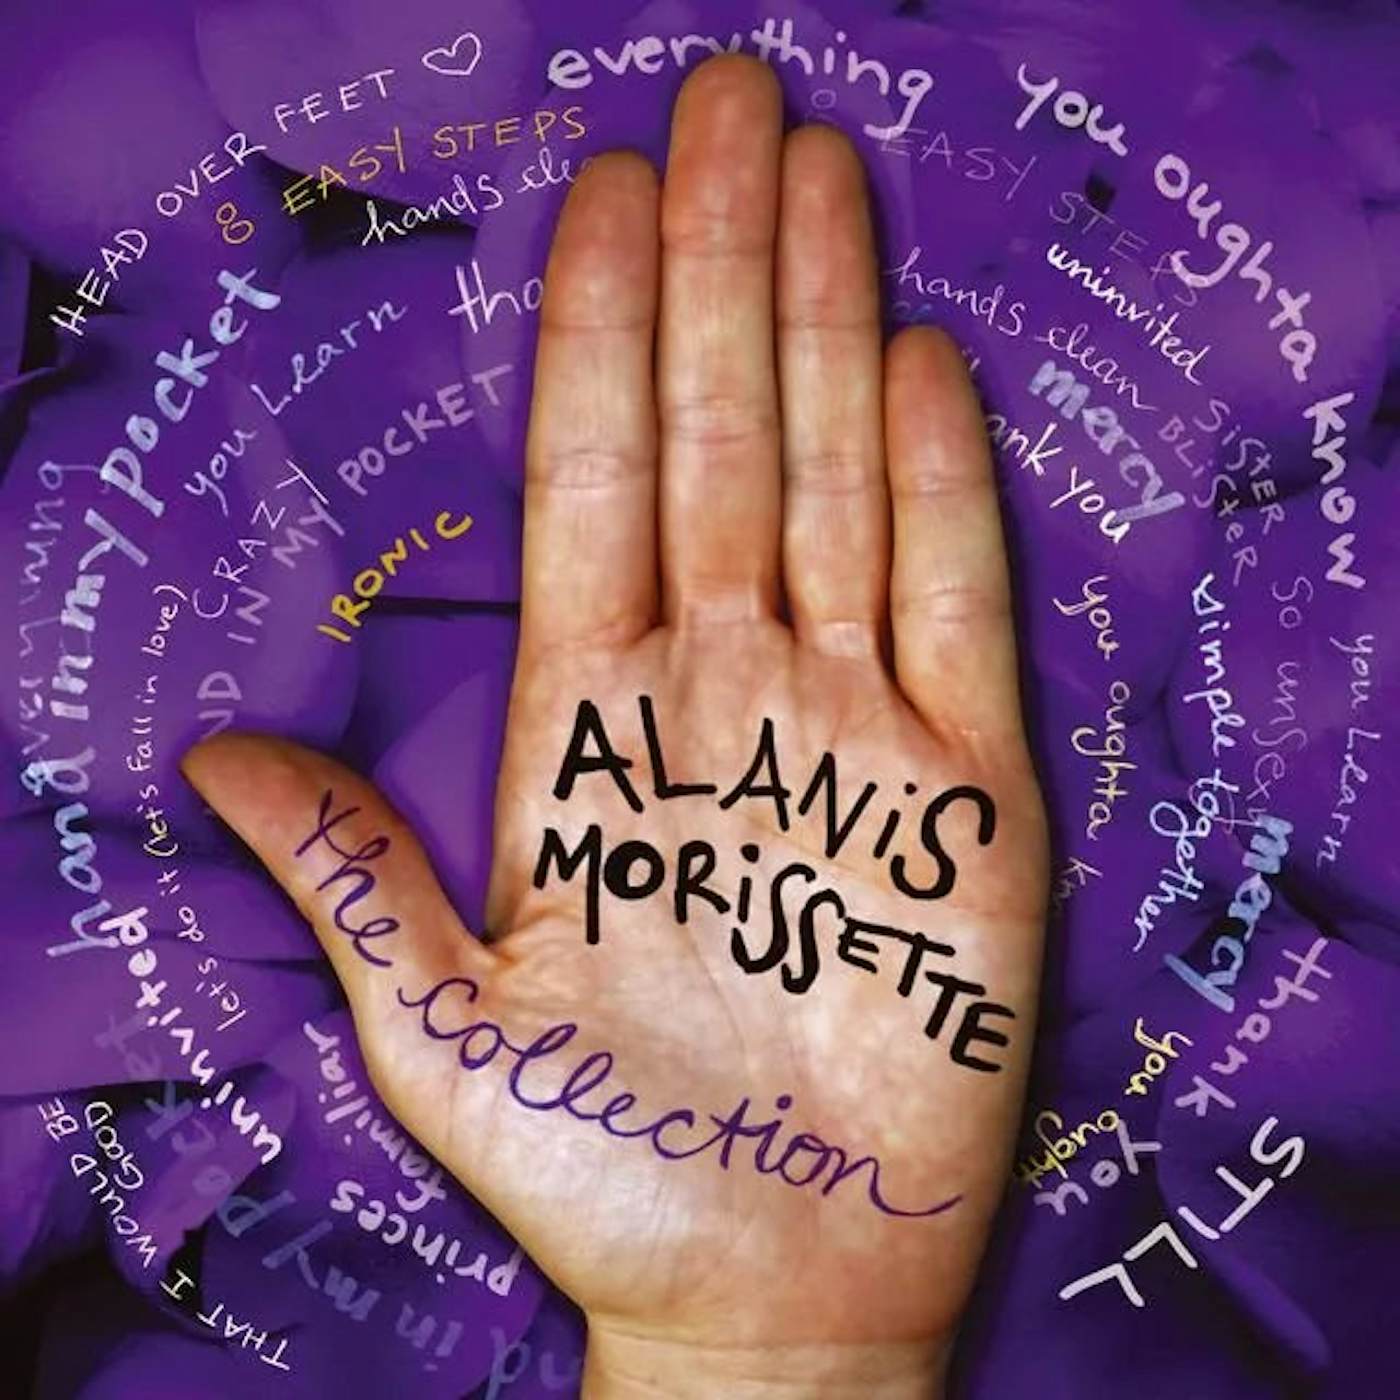 Alanis Morissette - The Collection CD